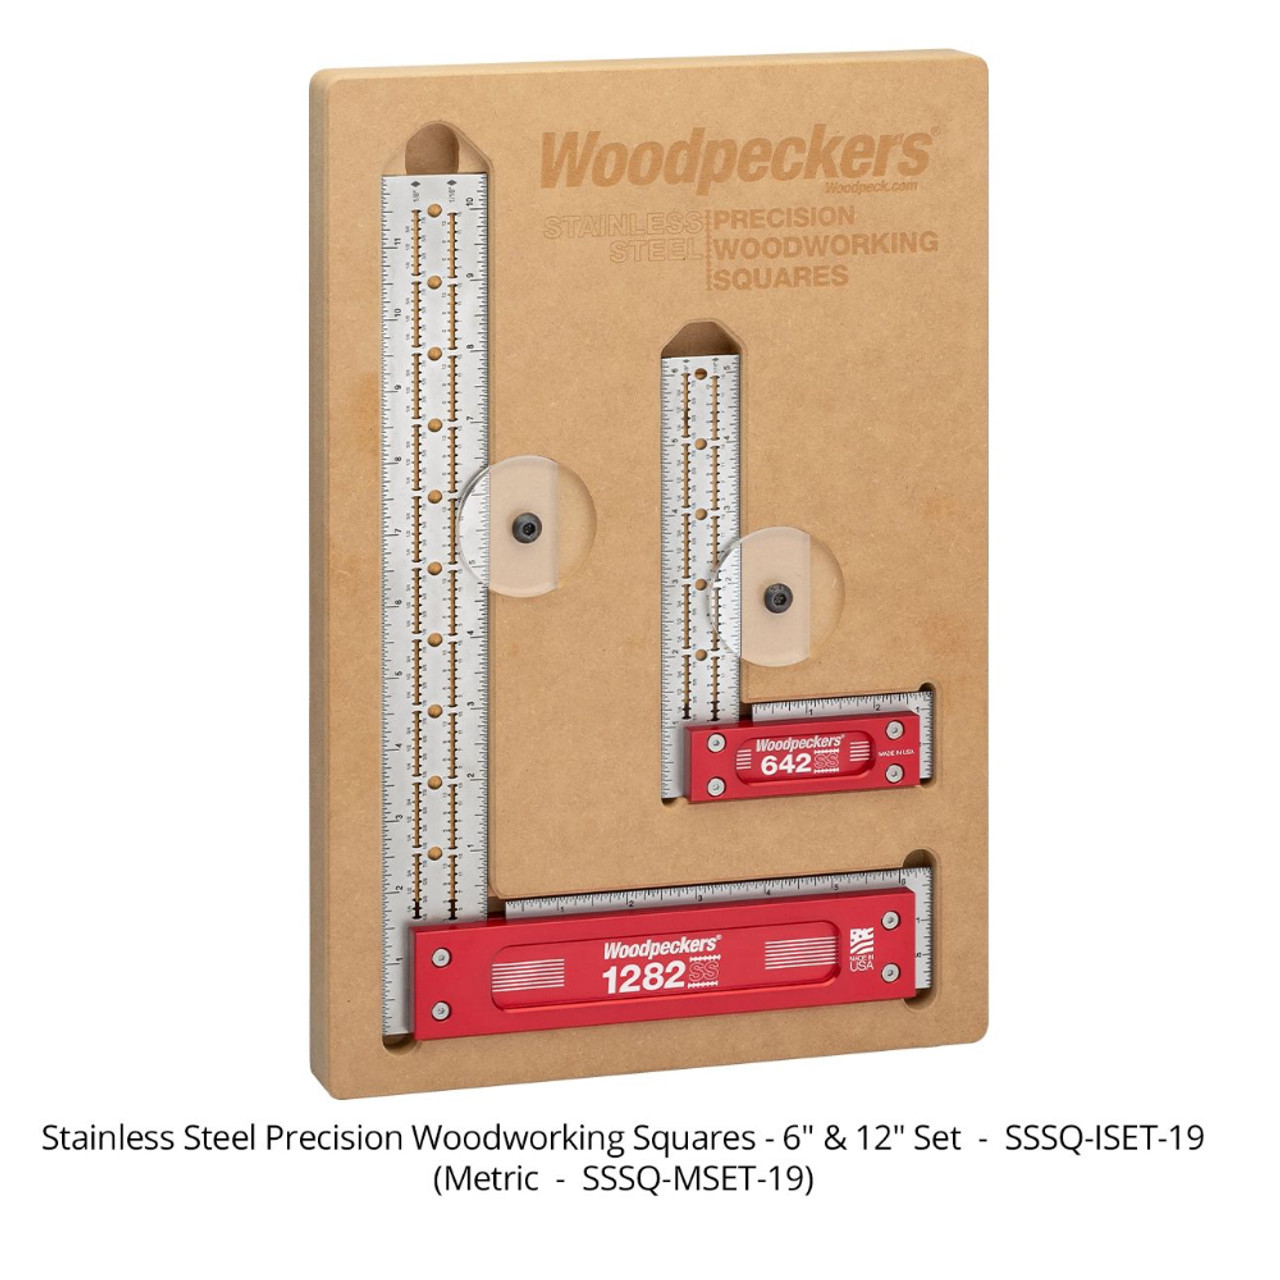 Stainless Steel Center Finding Ruler. Ideal for Woodworking, Metal